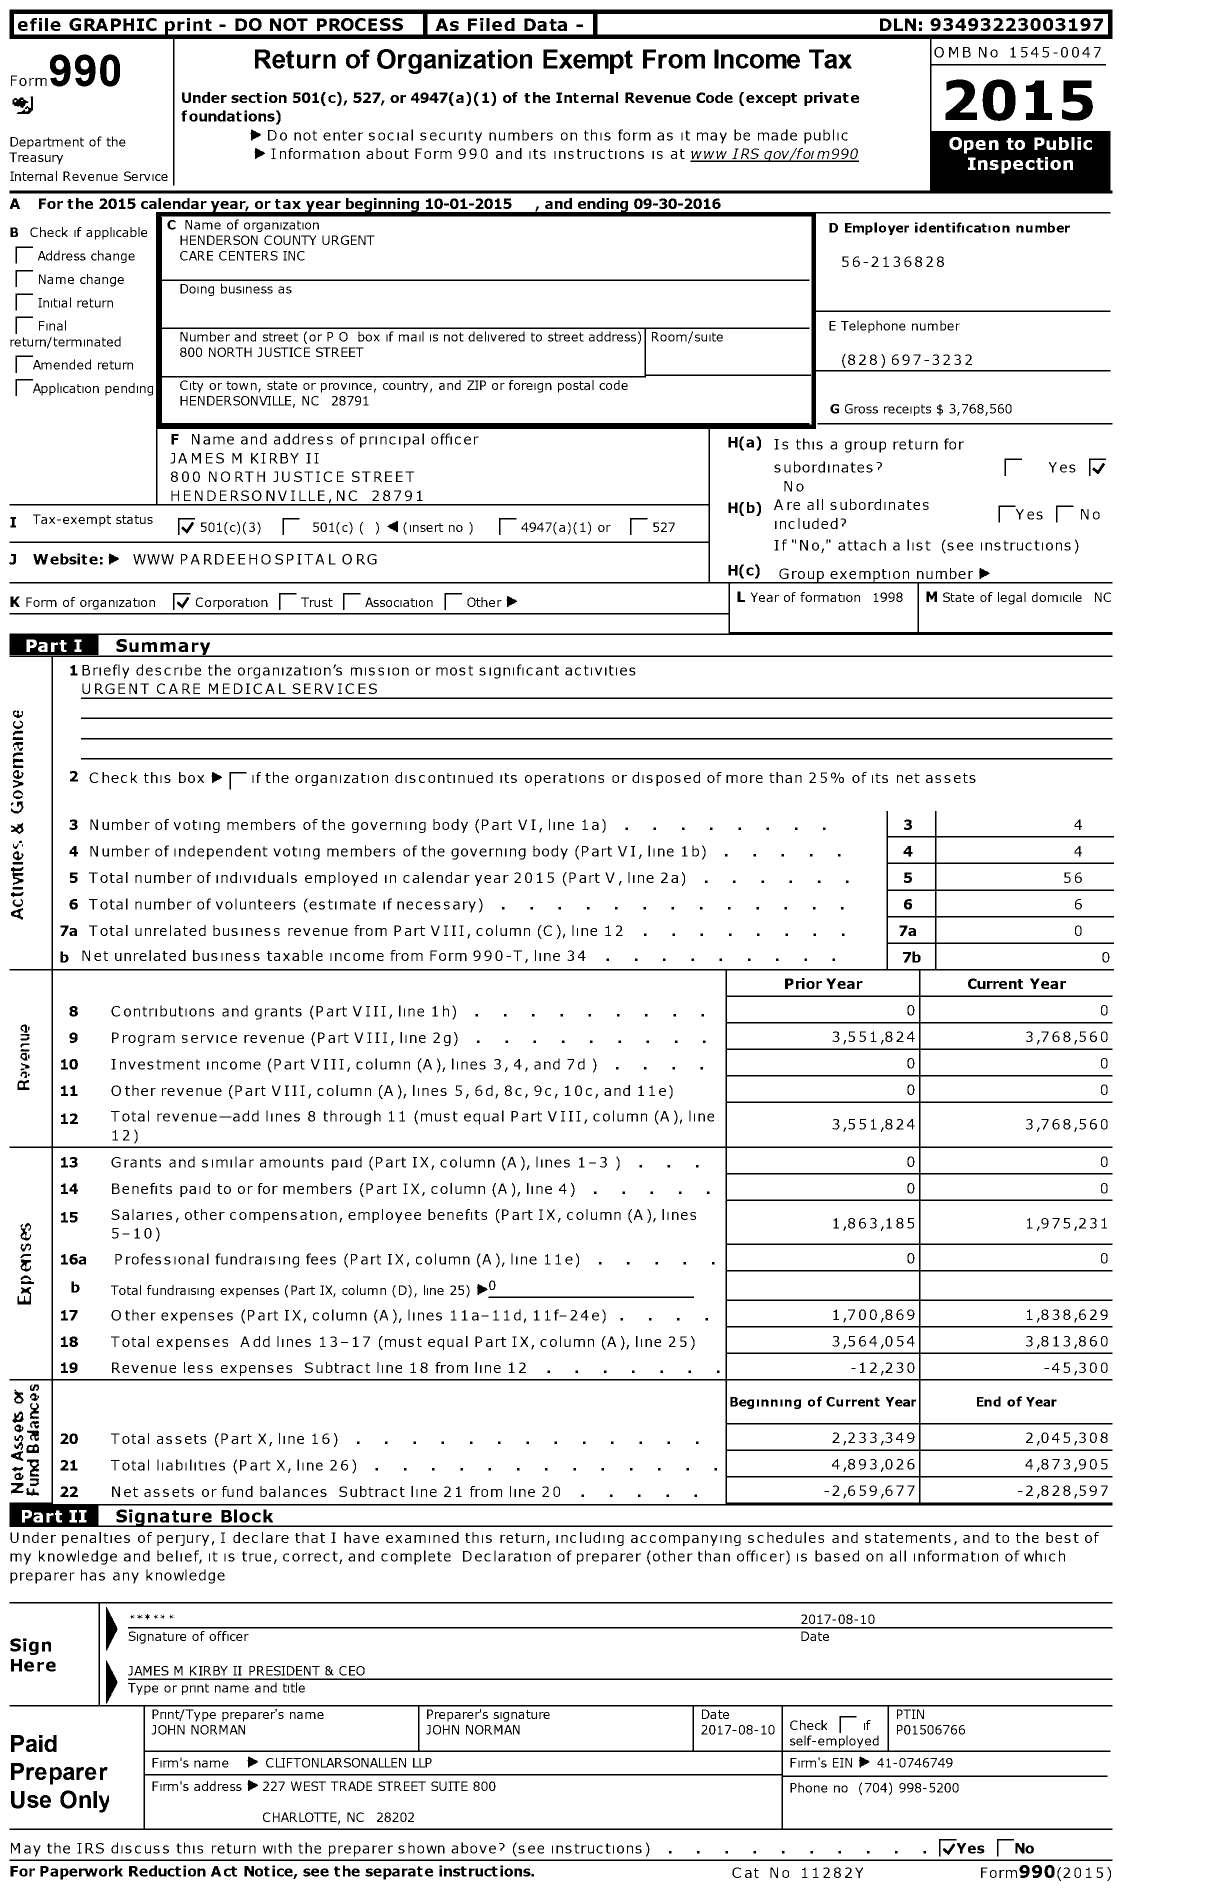 Image of first page of 2015 Form 990 for Henderson County Urgent Care Centers